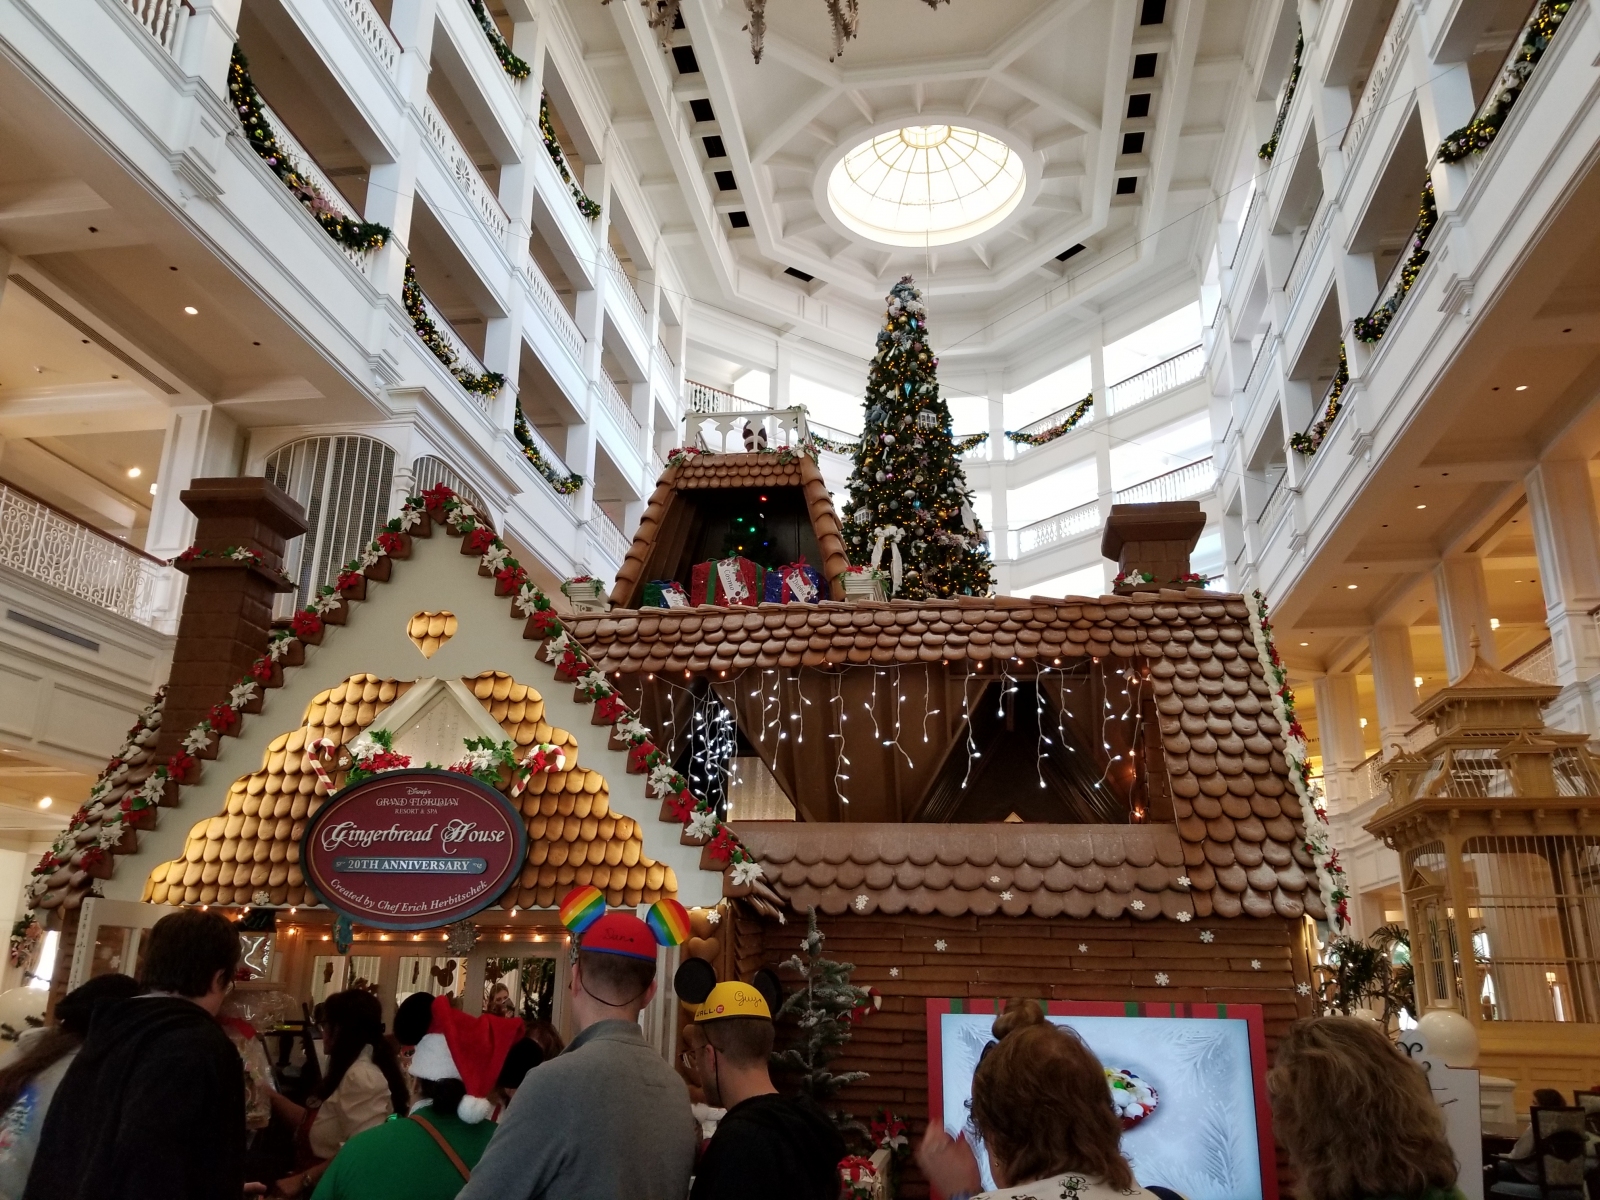 Gingerbread House 20th Anniversary Disney's Grand Floridian Resort